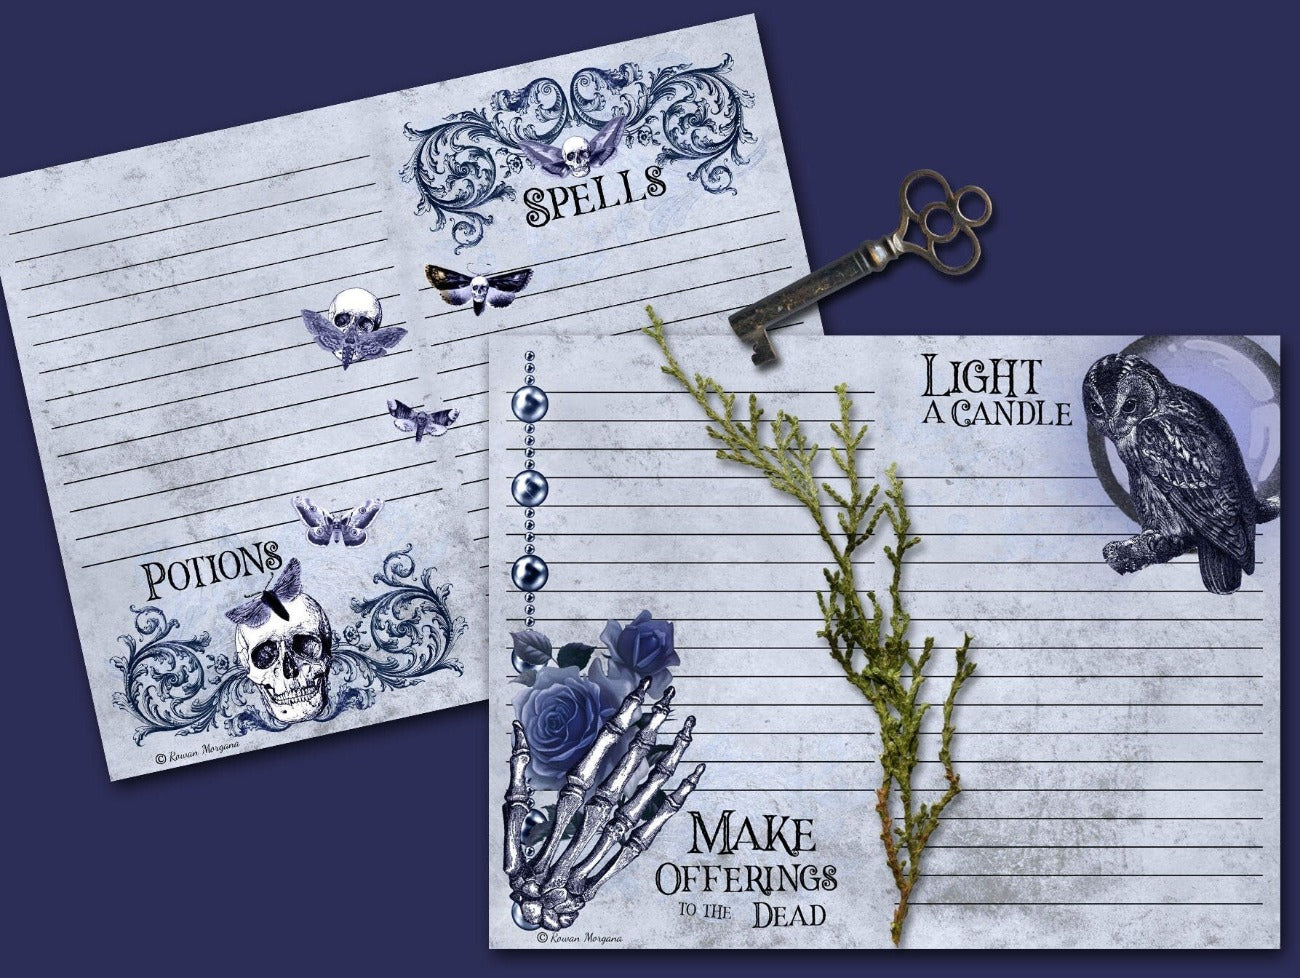 Potions, Spells, Light a Candle and Make an Offering to the Dead - SAMHAIN JUNK JOURNAL Kit Printable Pages - Morgana Magick Spell